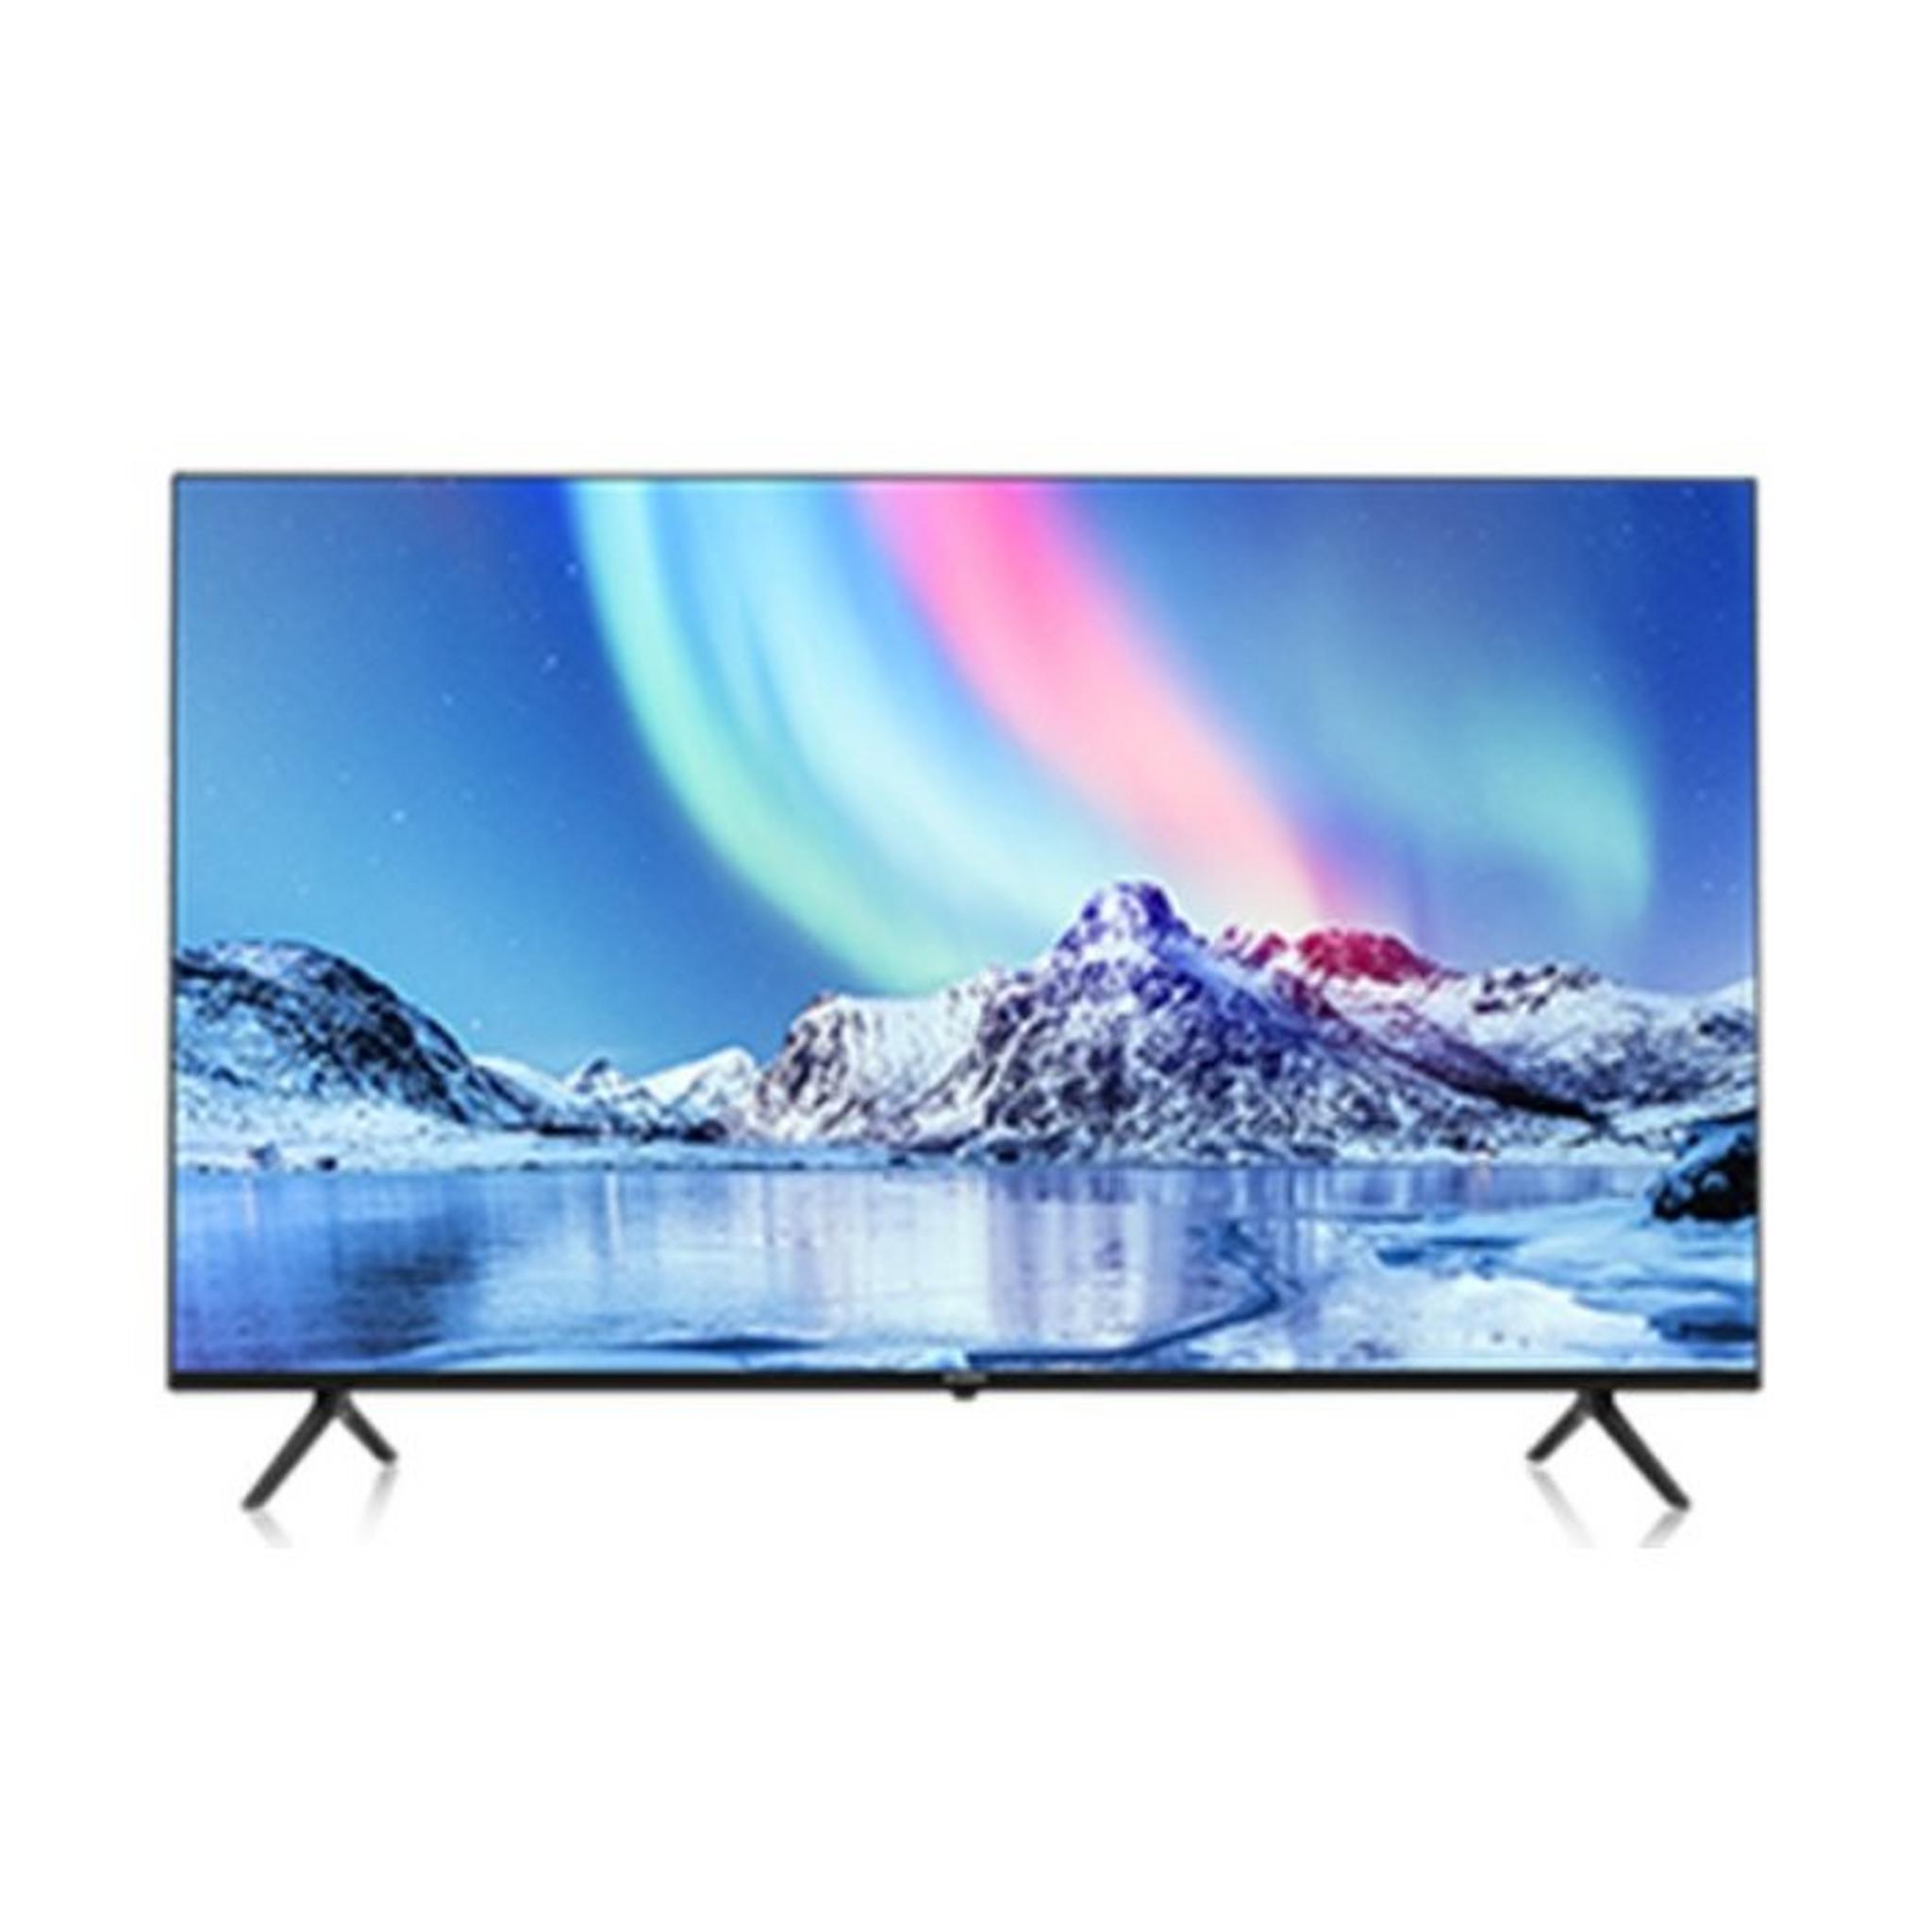 Skyworth 70-inch Android 4K LED TV (70SUC9400)